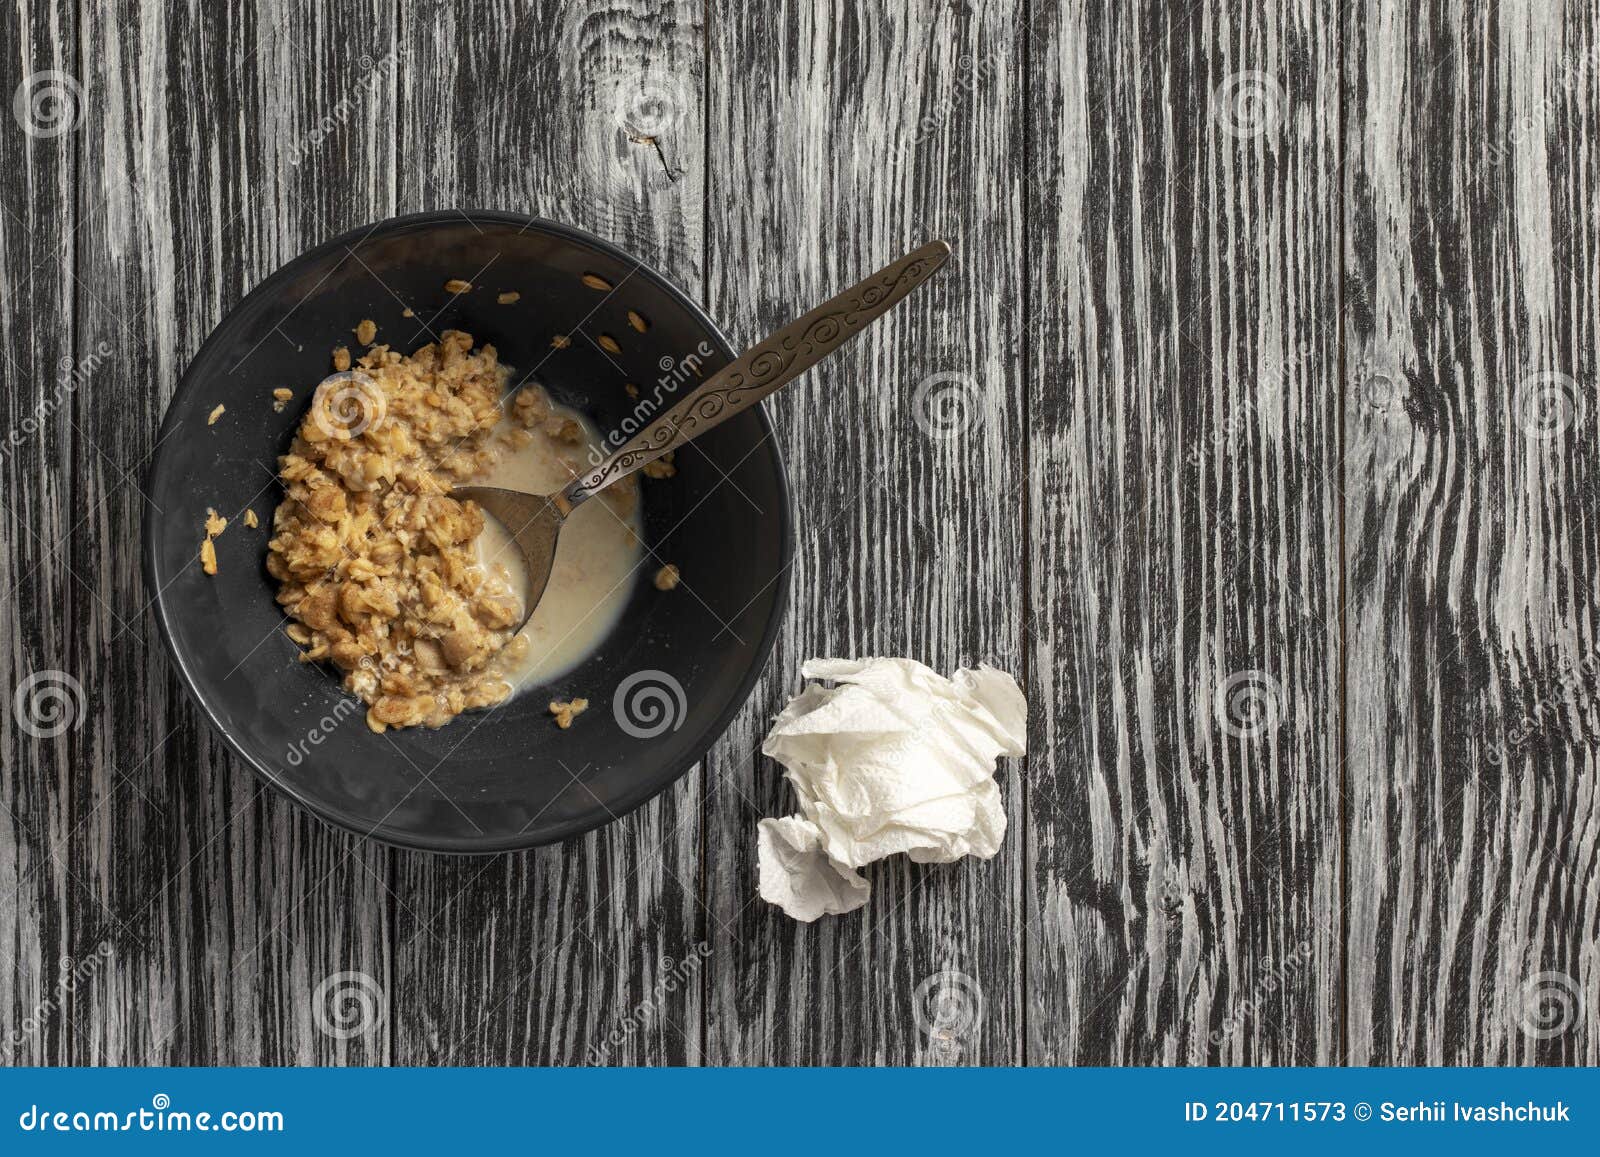 remains of flakes in a plate. remainder of food from a breakfast.